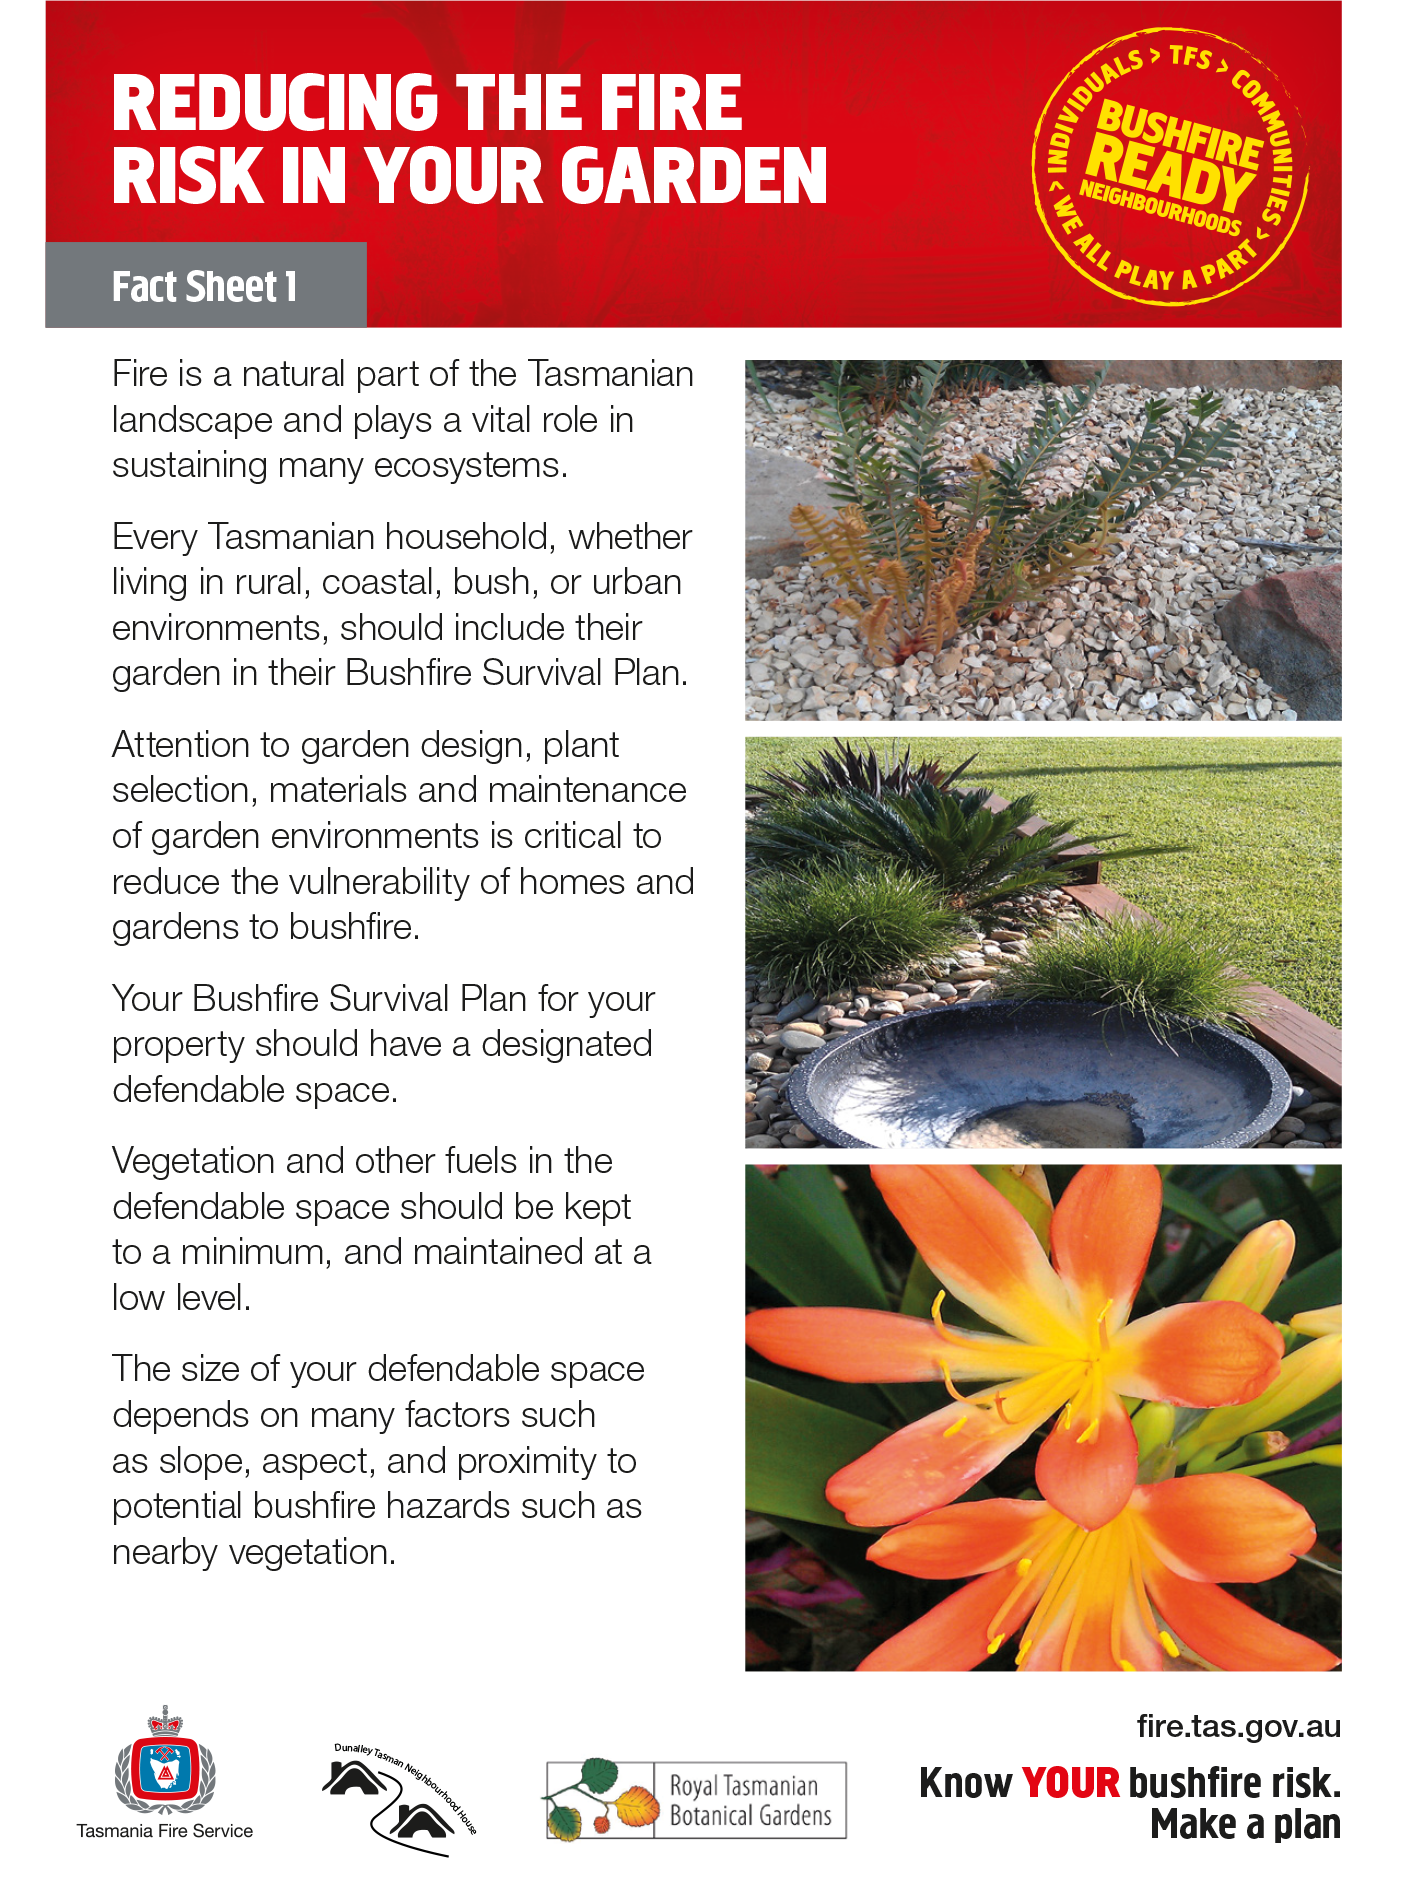 Reducing the Fire Risk in your garden